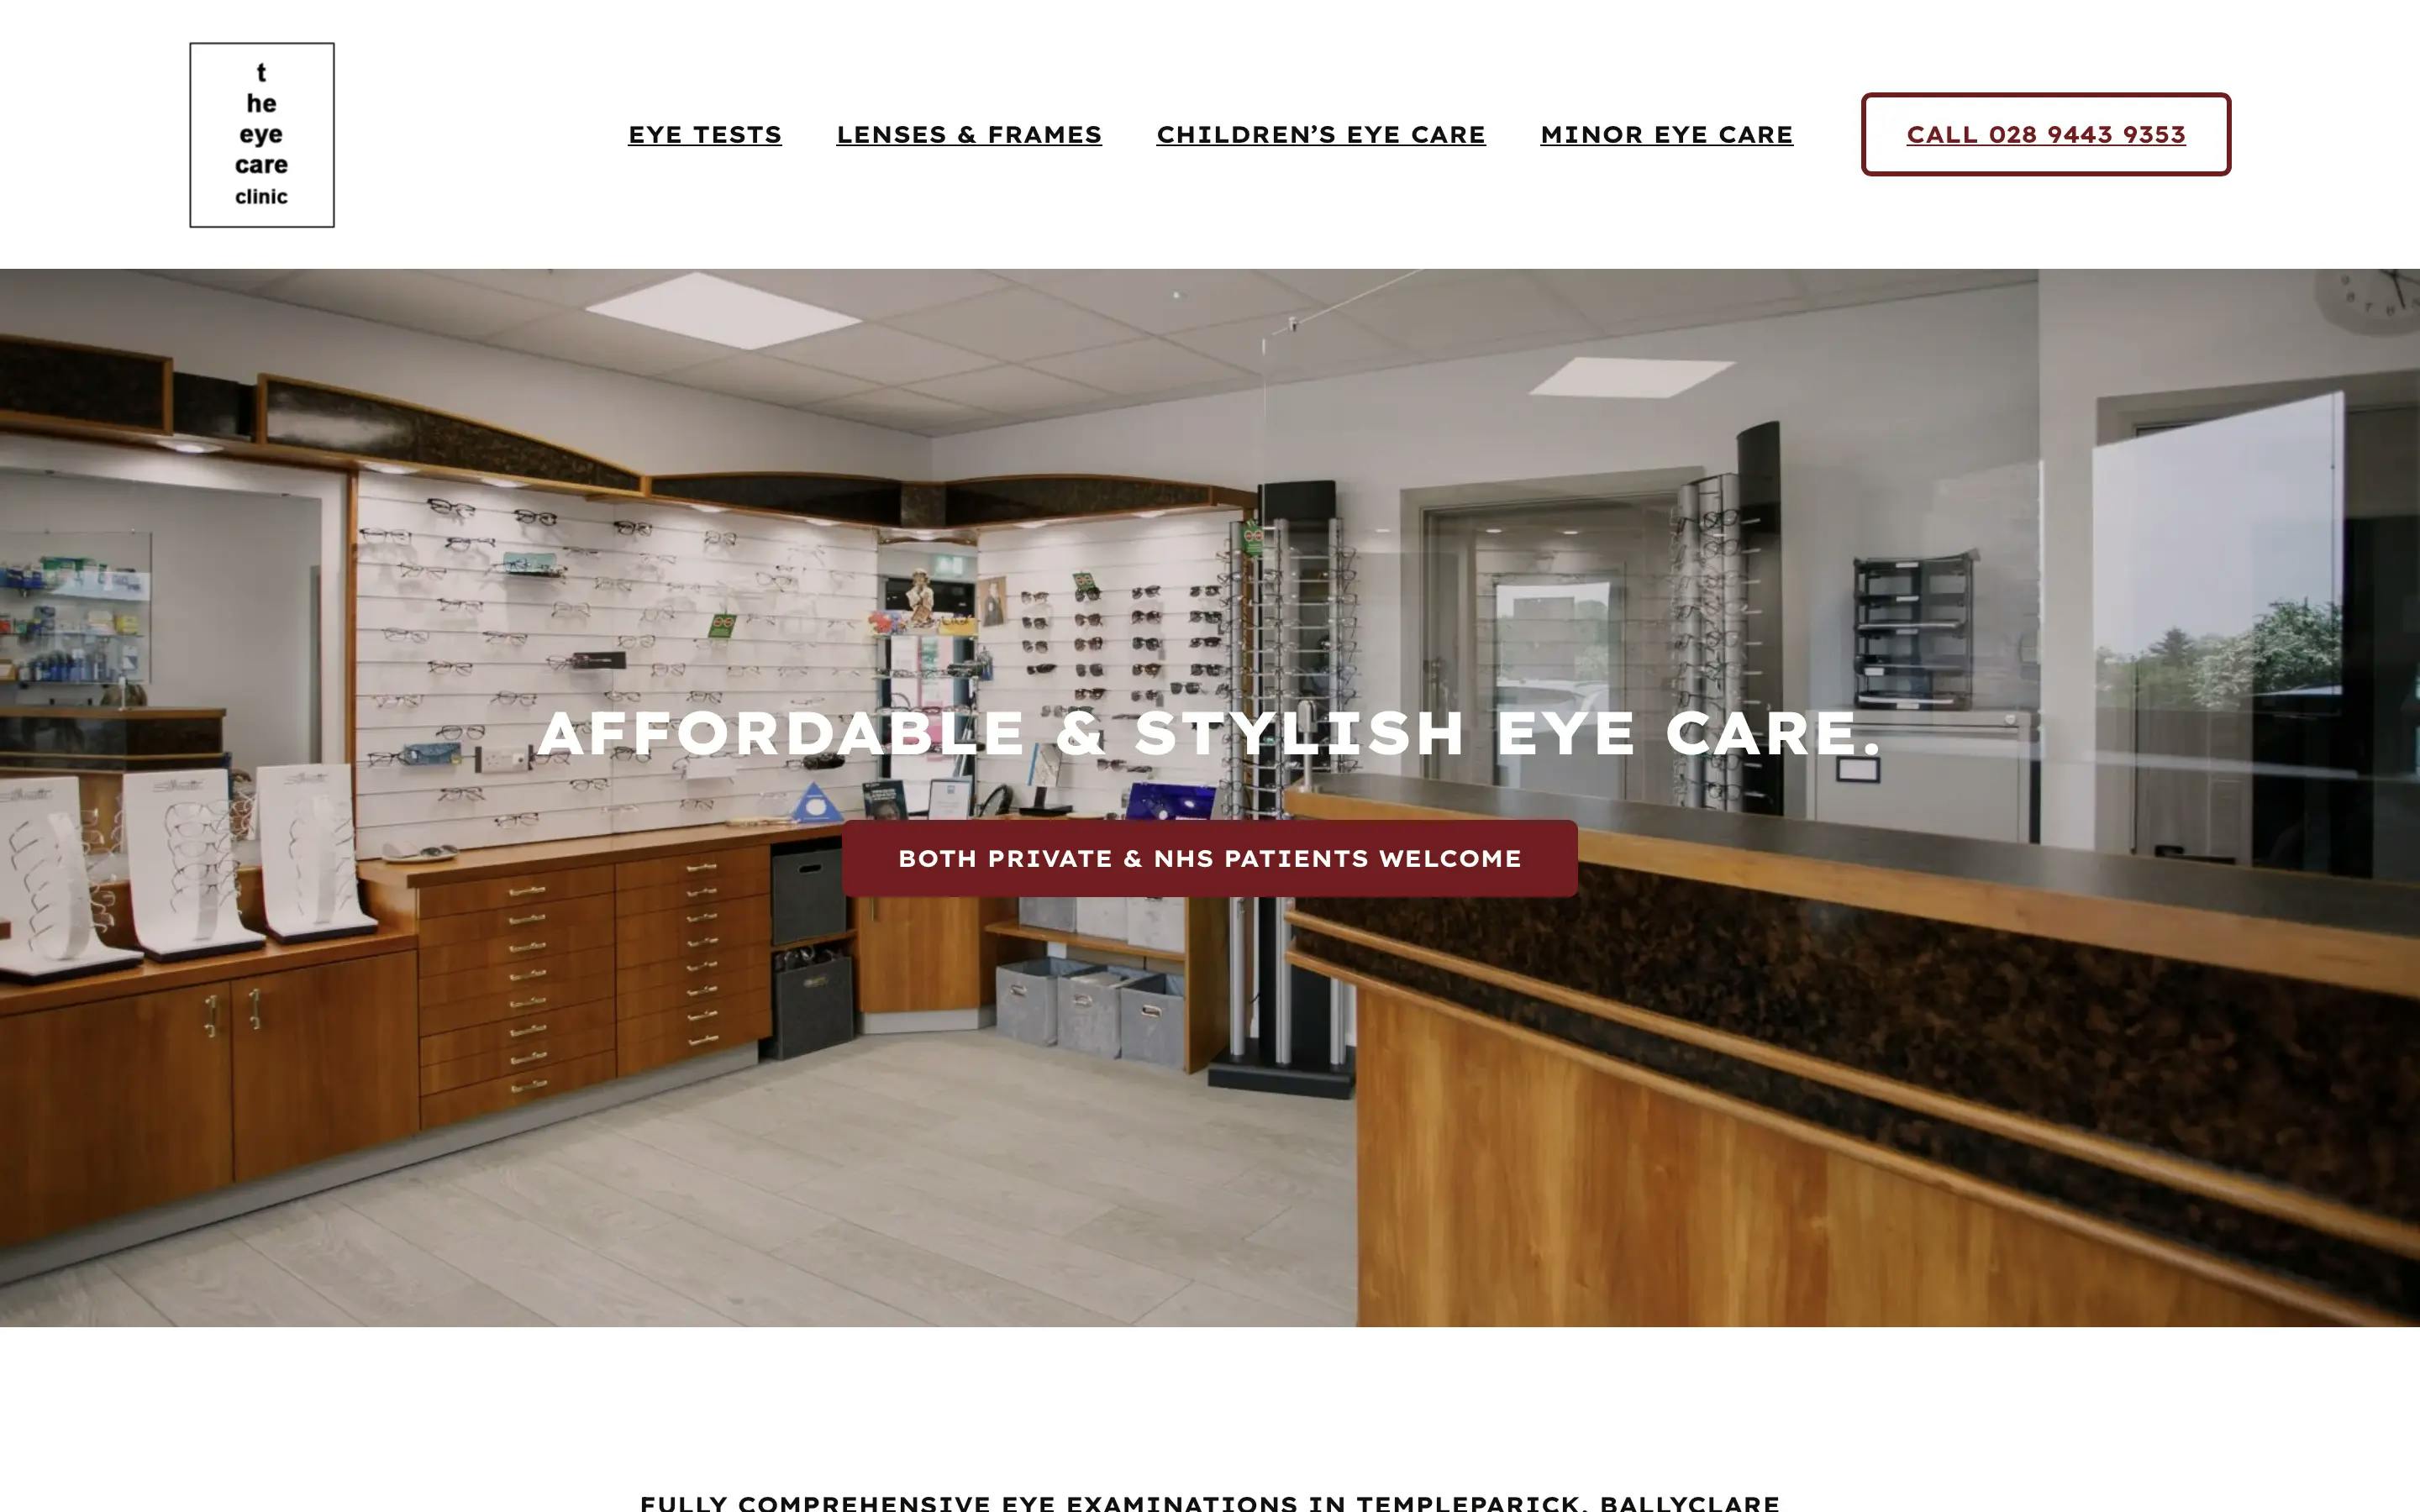 The Eye Care Clinic